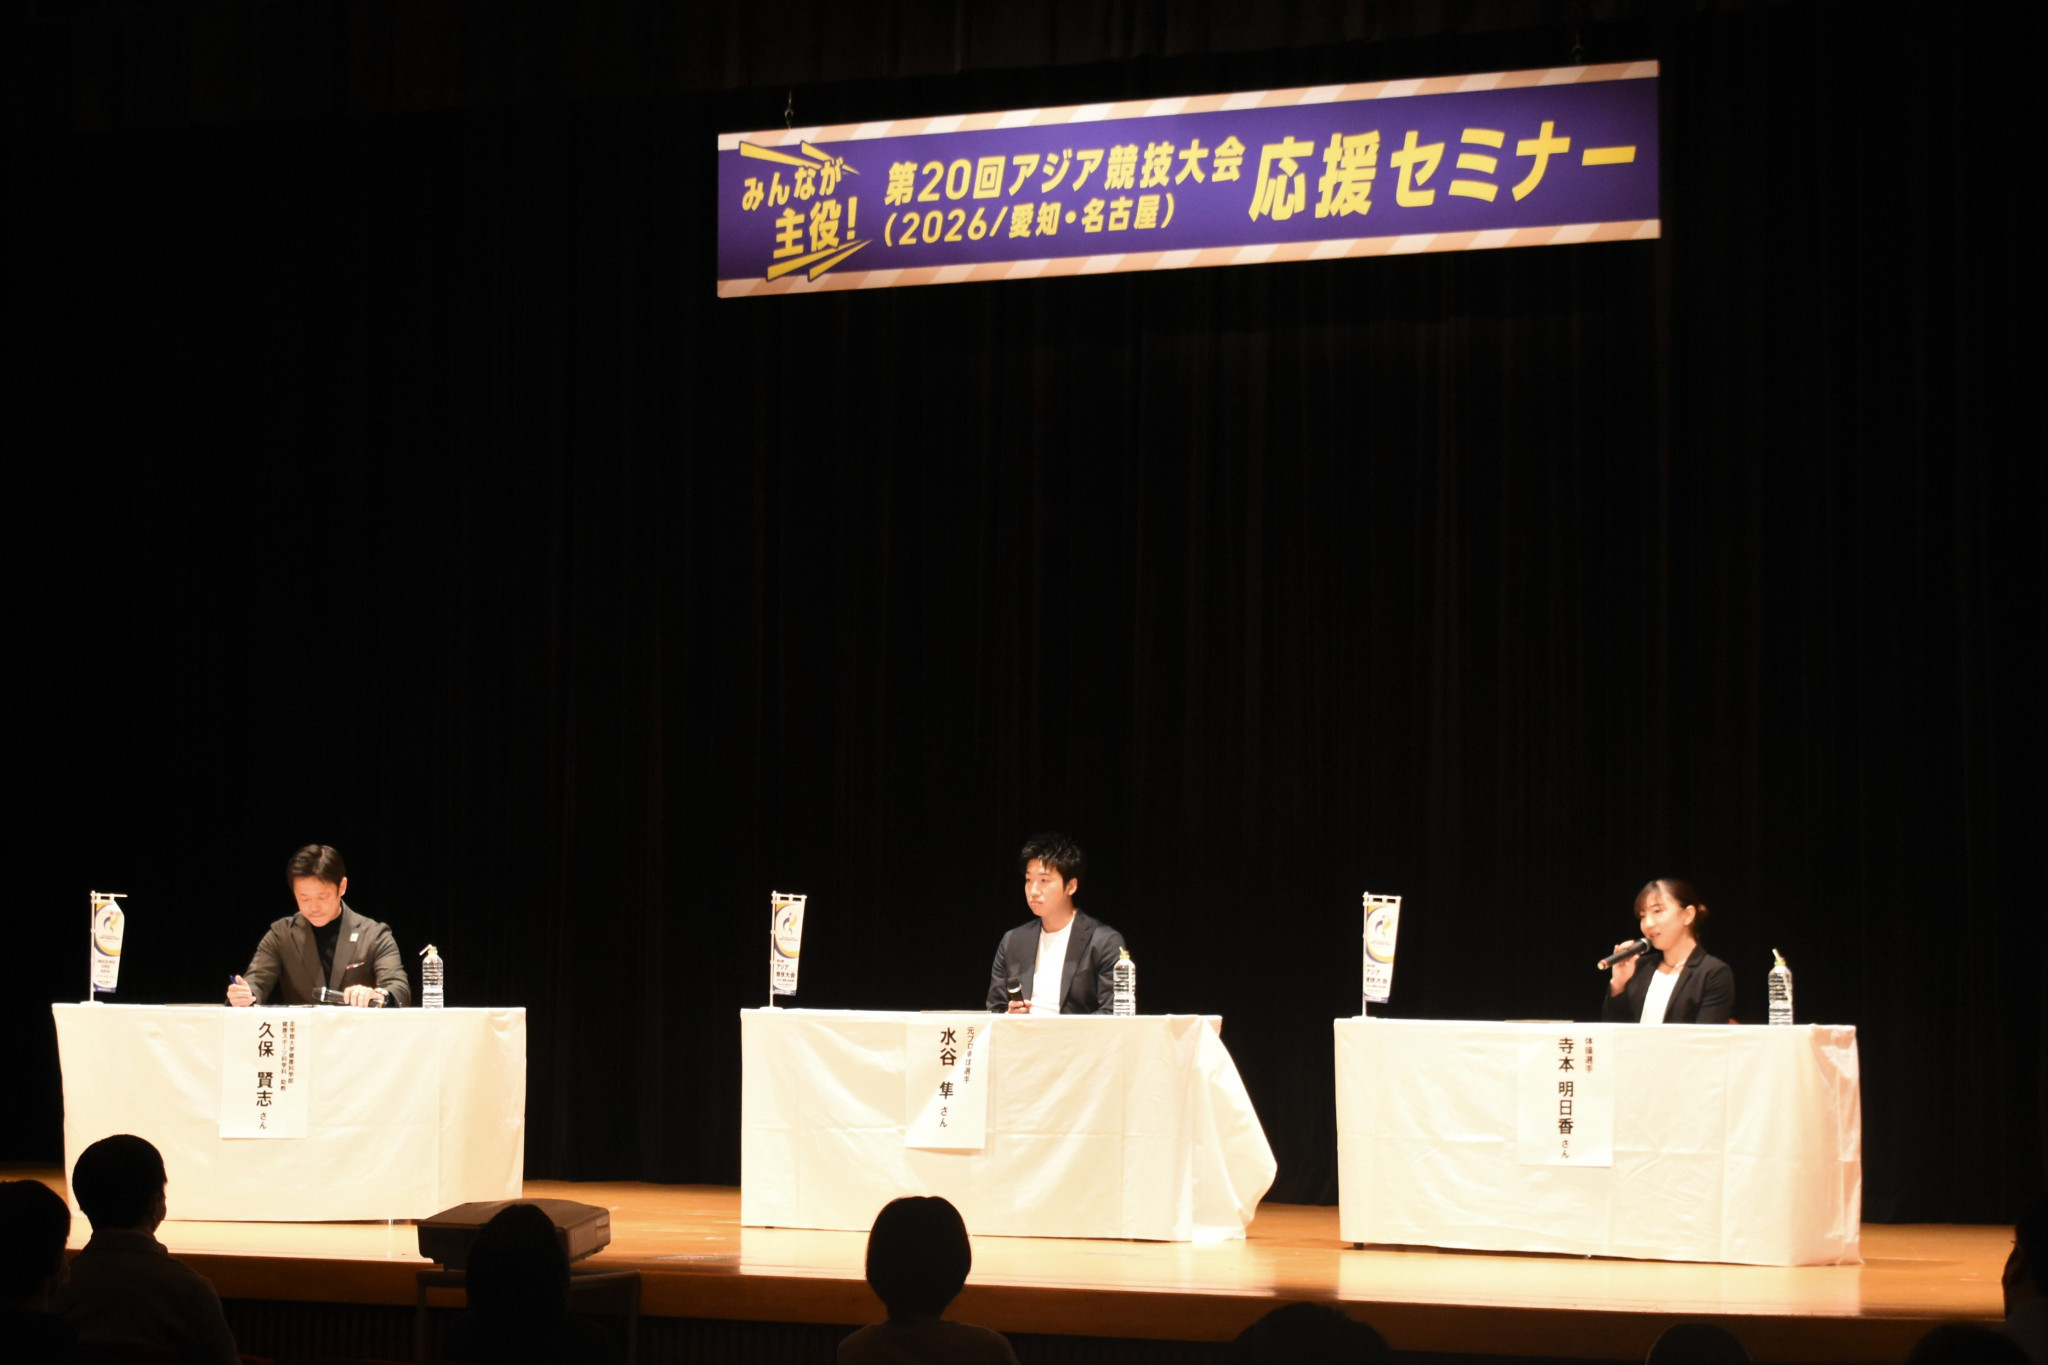 A panel discussion on the Asian Games was held as part of the Aichi-Nagoya 2026 support seminar ©Aichi-Nagoya 2026